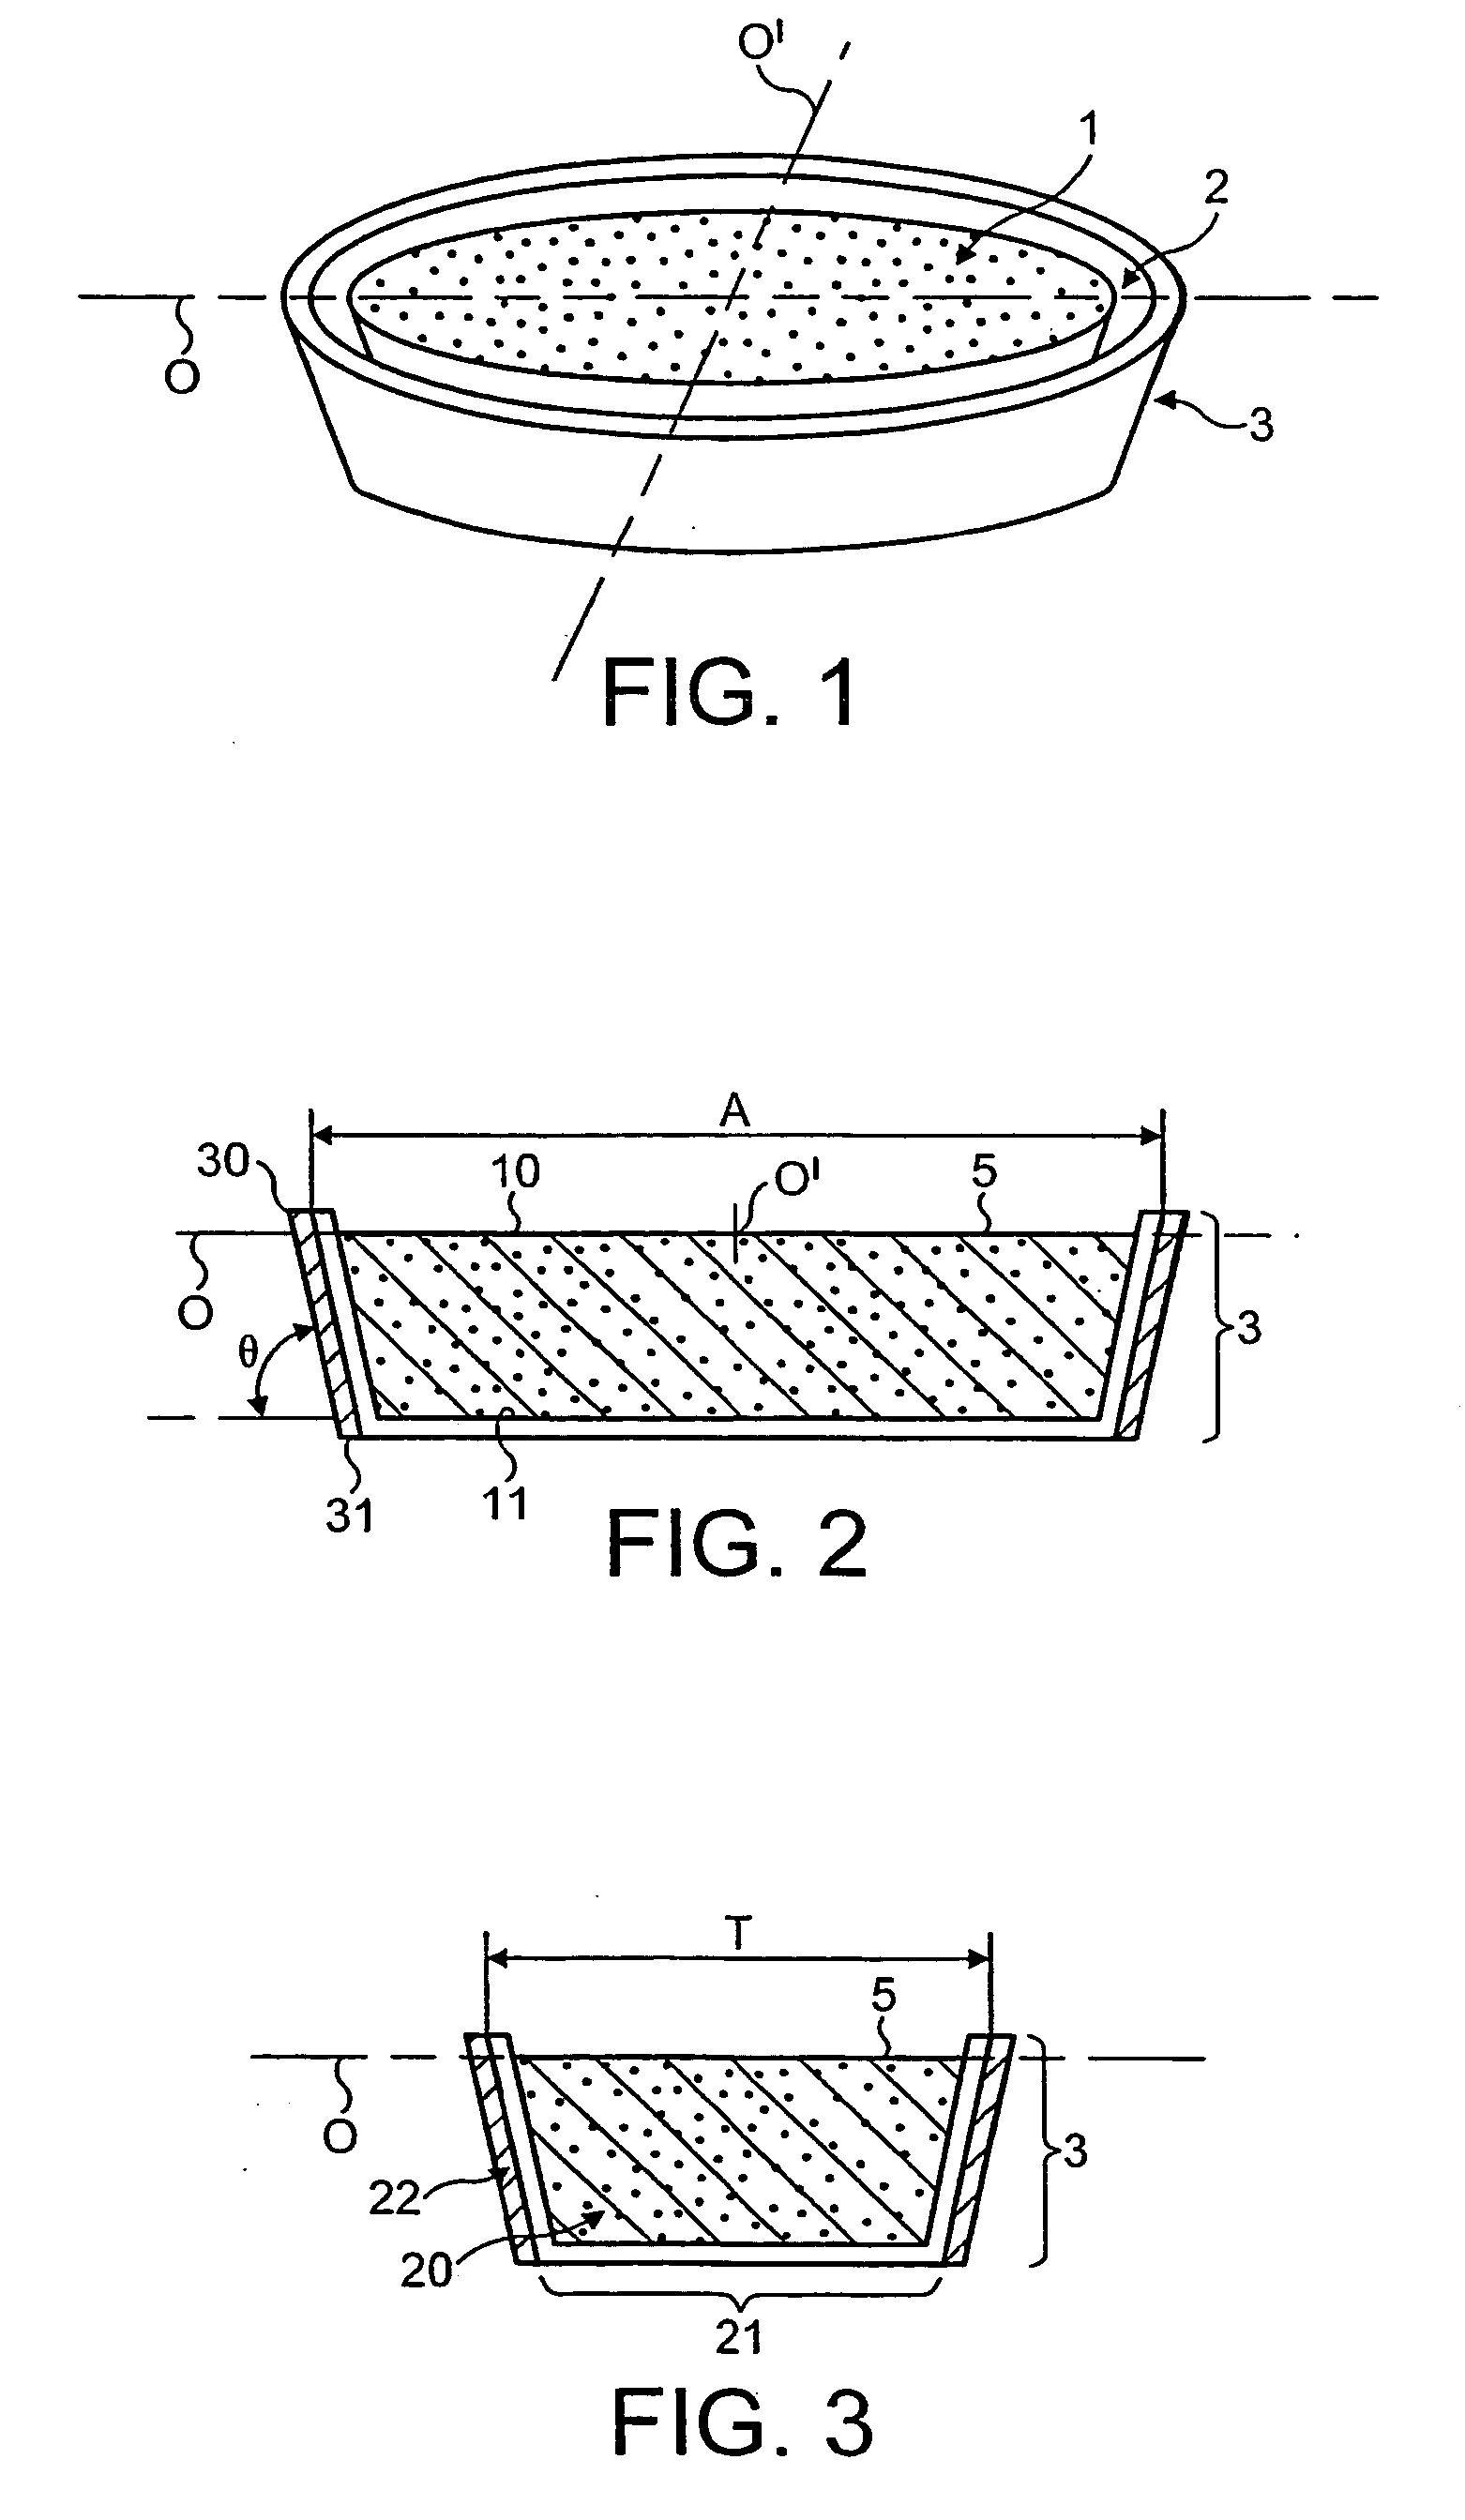 Uniform microwave heating of food in a container